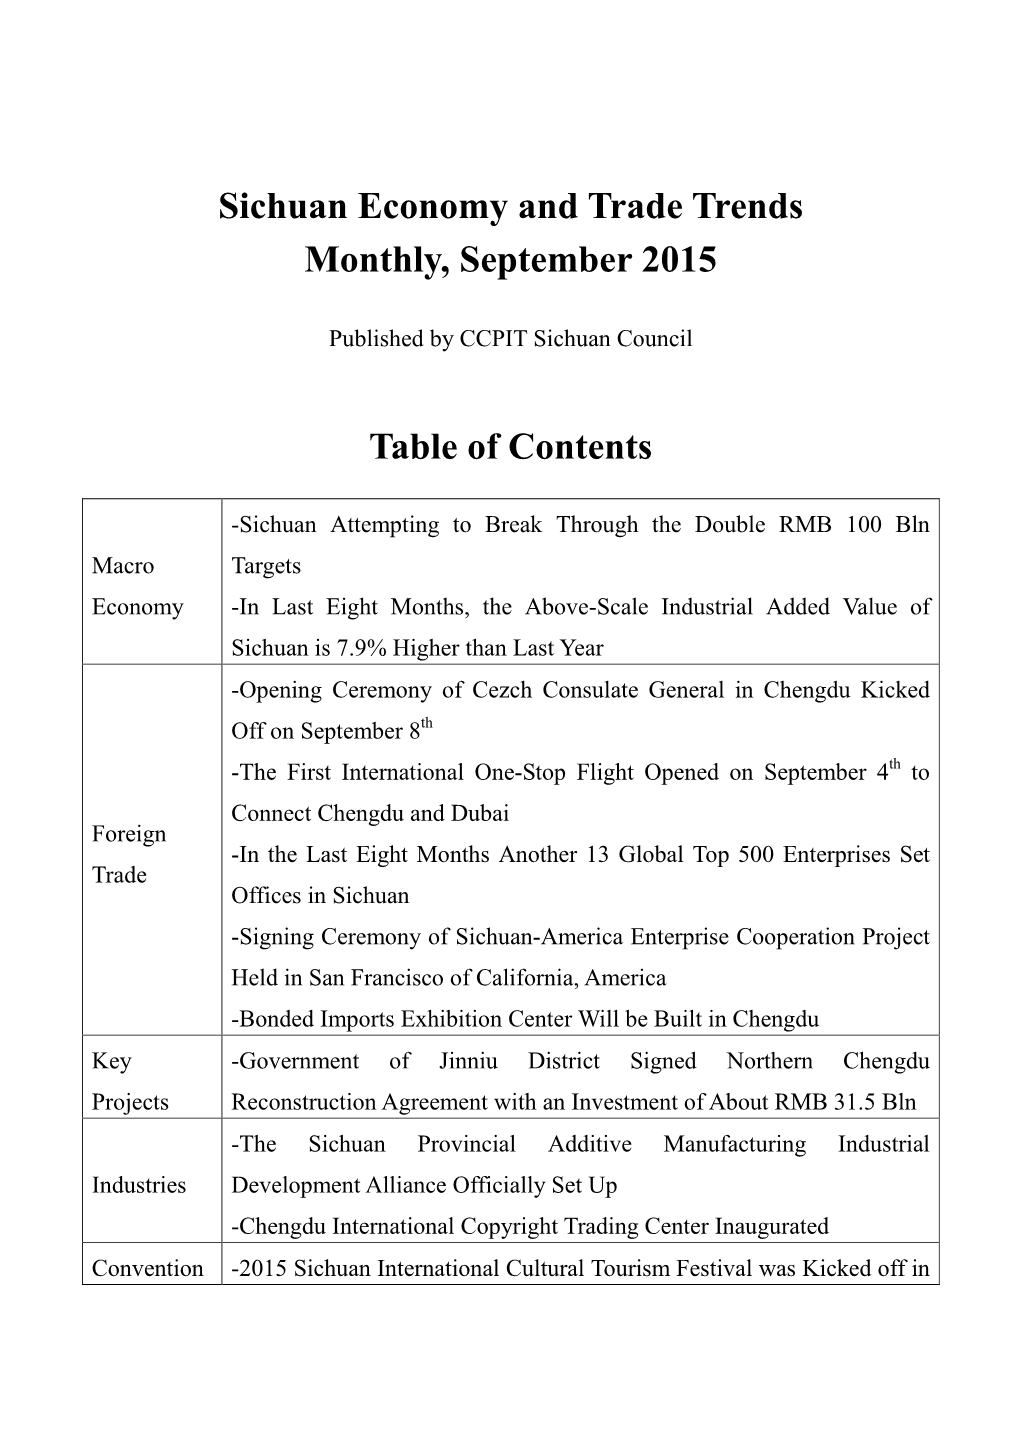 Sichuan Economy and Trade Trends Monthly, September 2015 Table Of